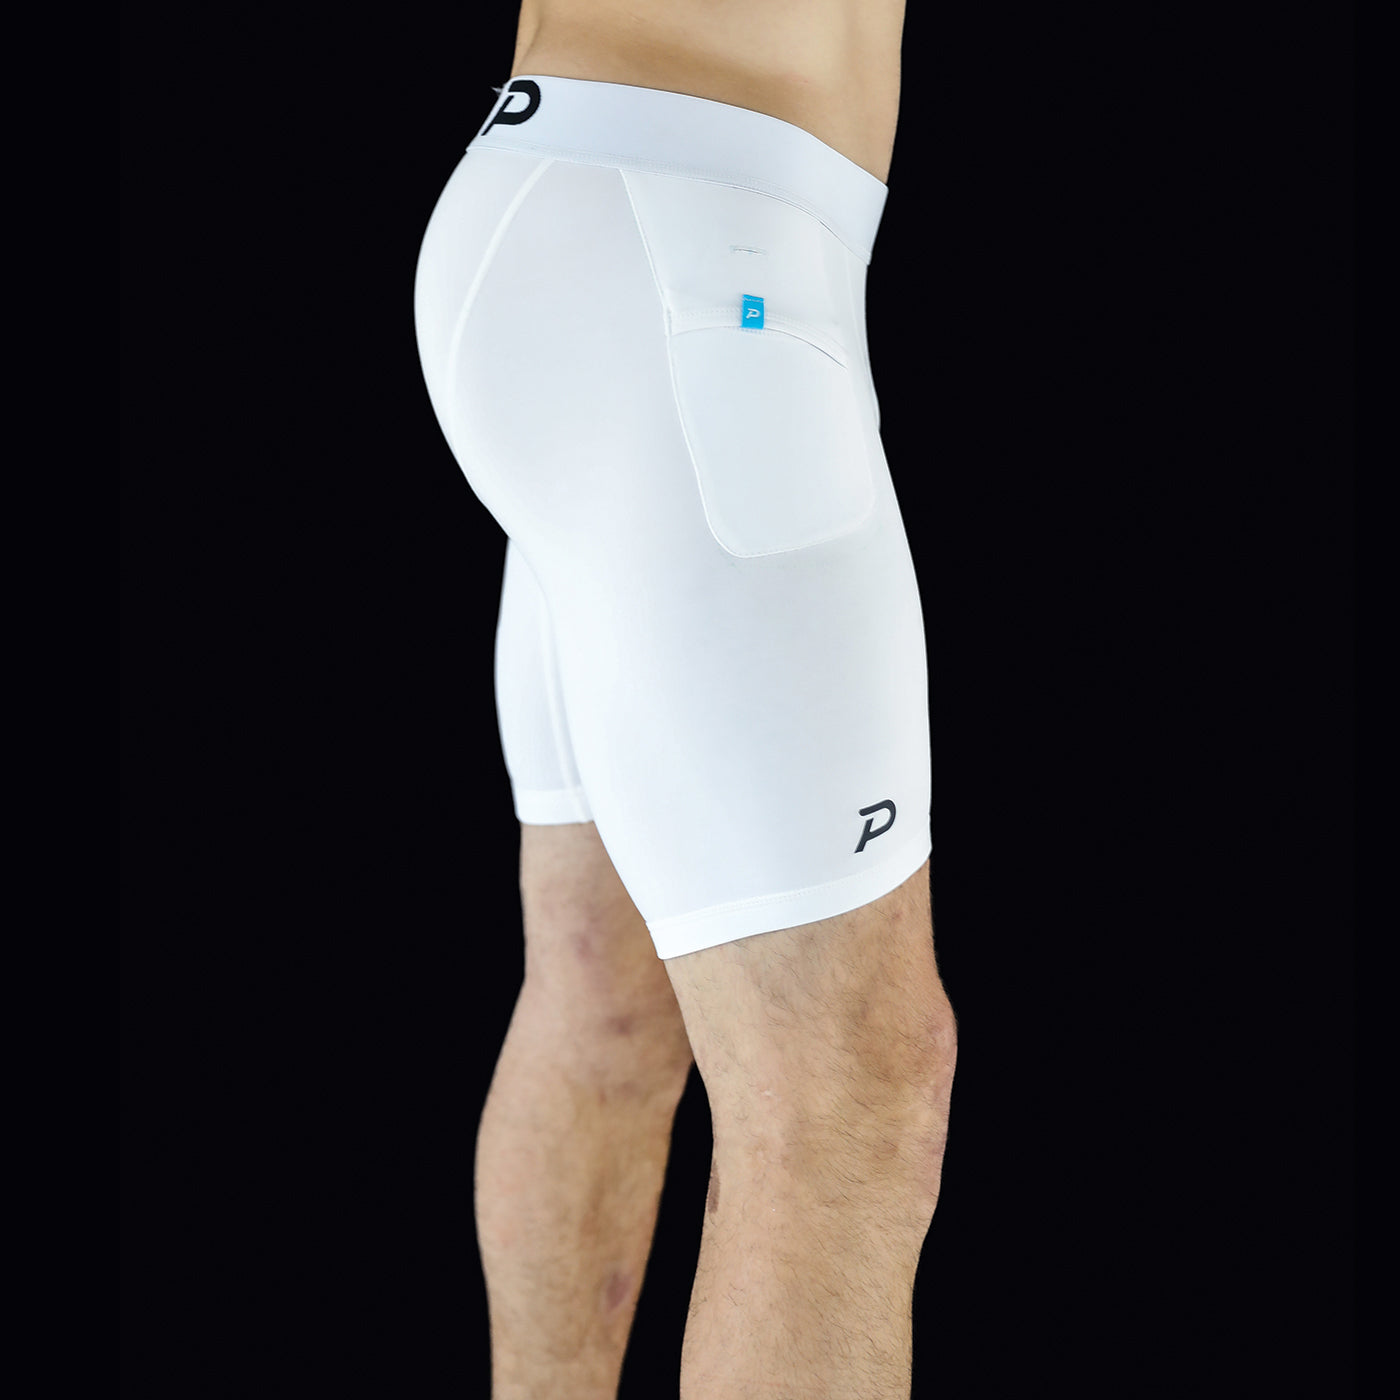 Middy Compression Short